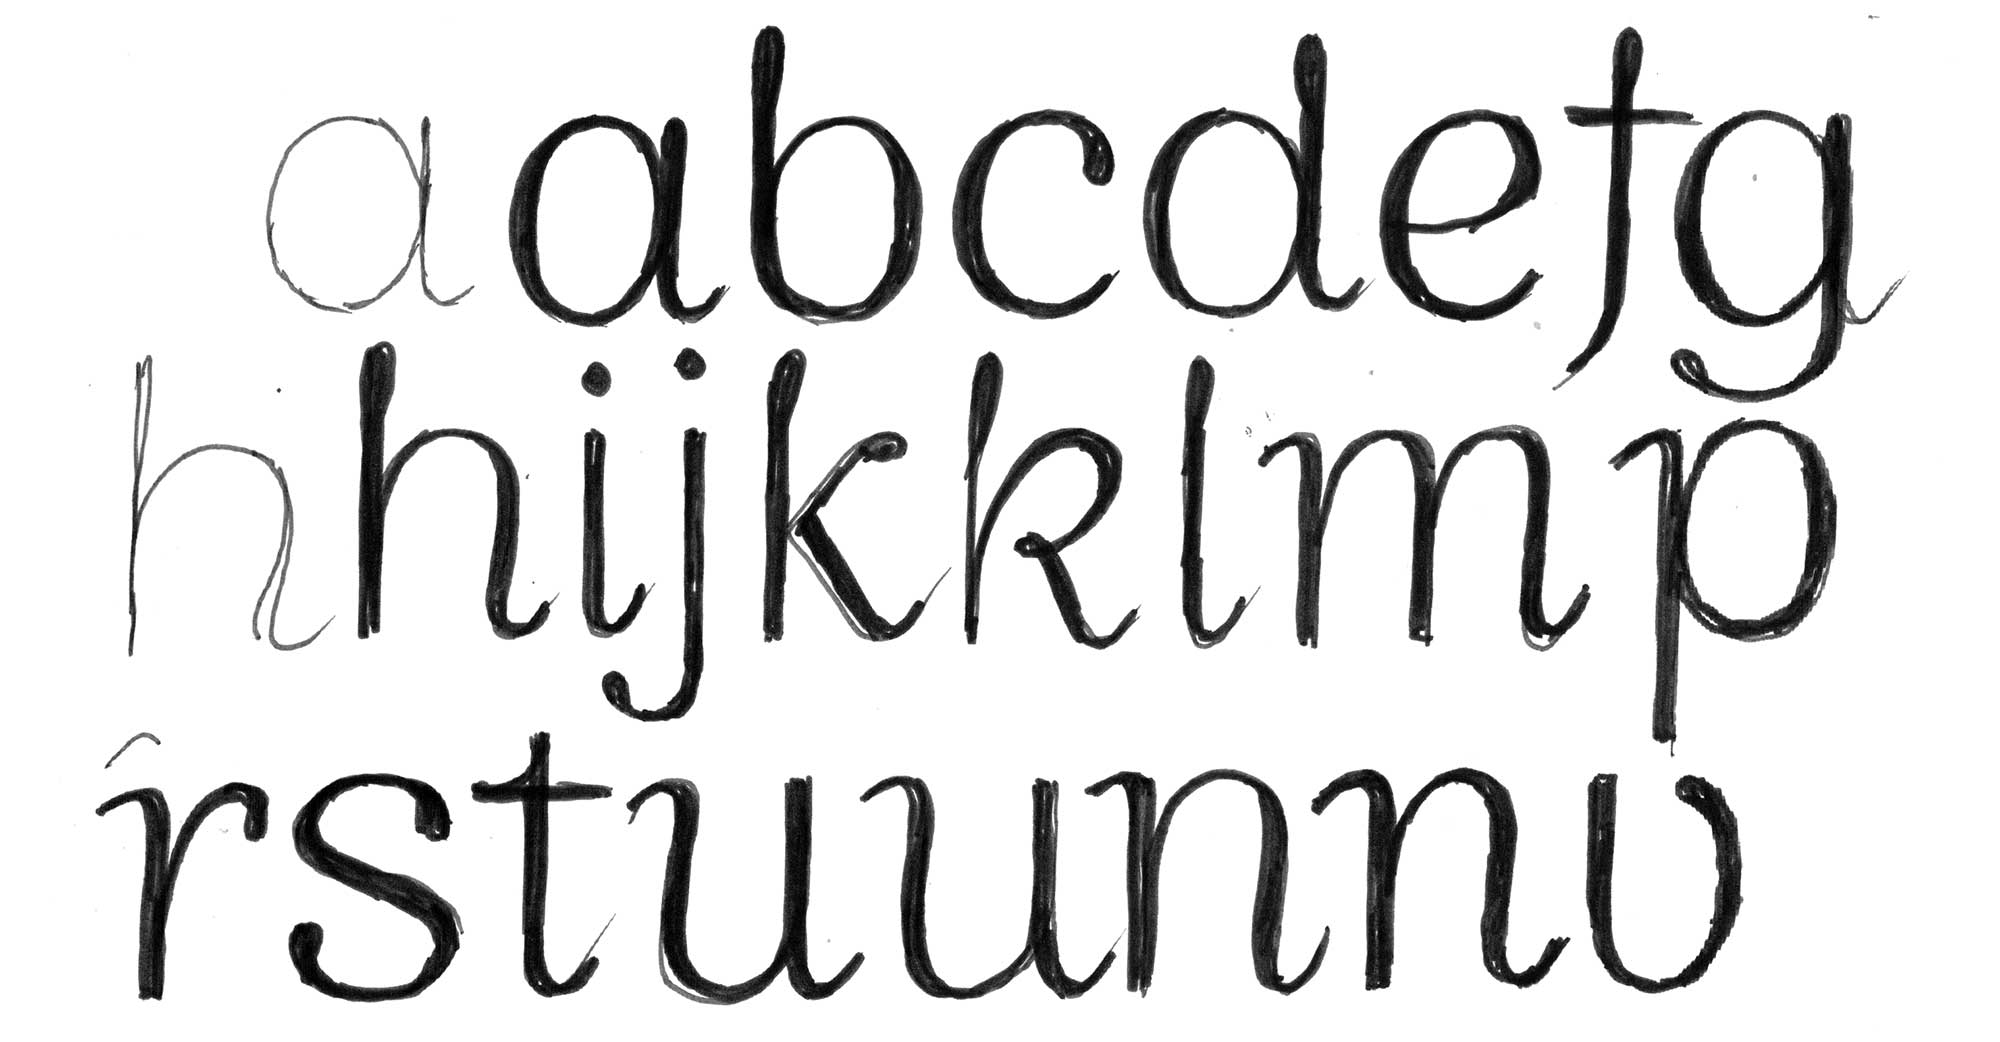 Very thin manual type sketches of the letters a to v